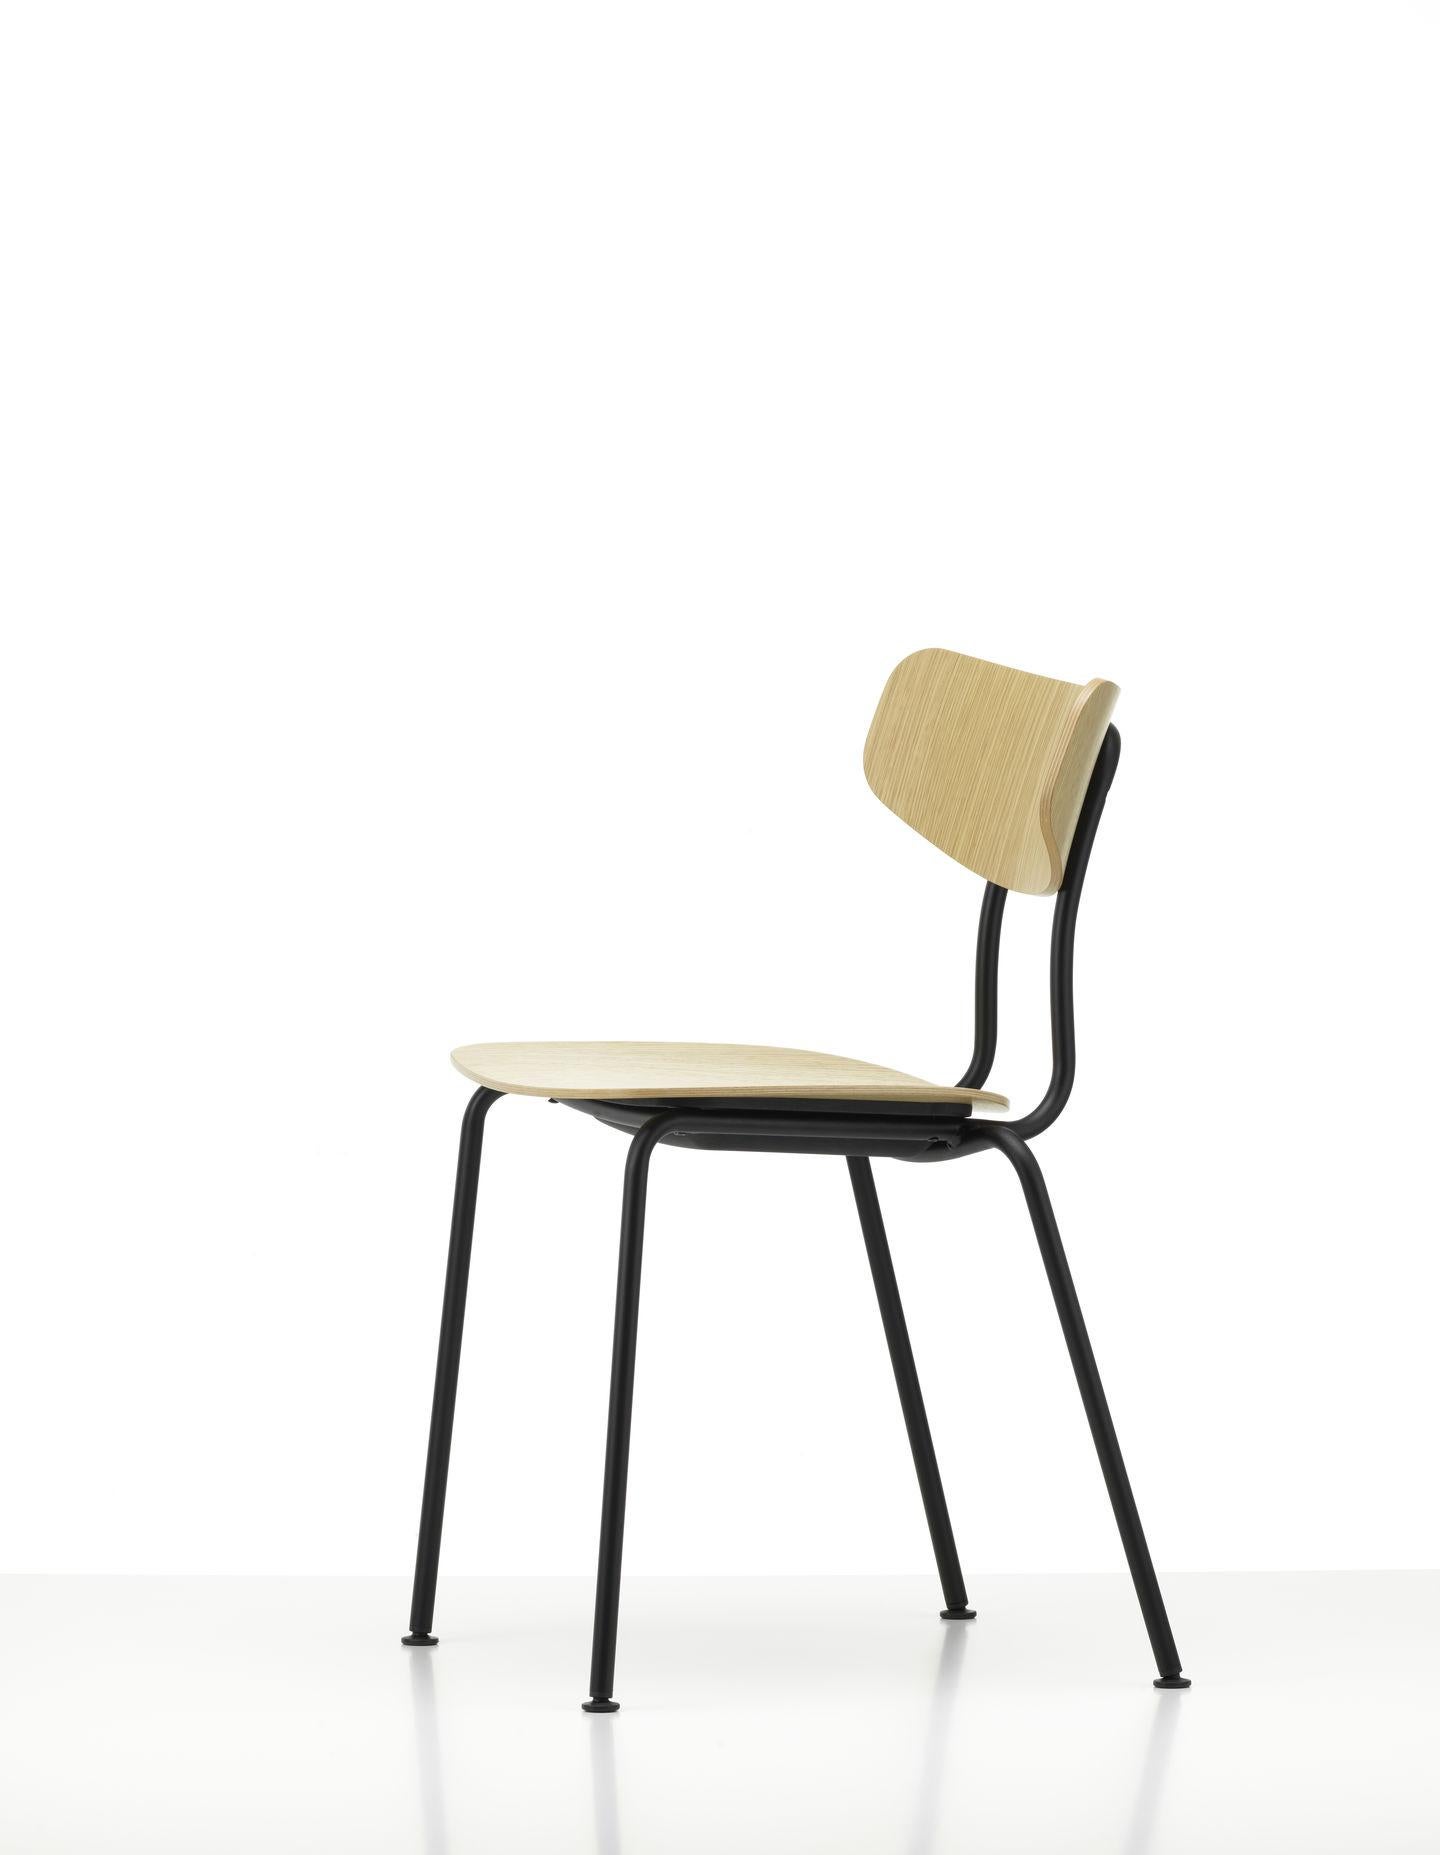 Swiss Set of Six Moca Chairs in Plywood and Metal Designed by Jasper Morrison